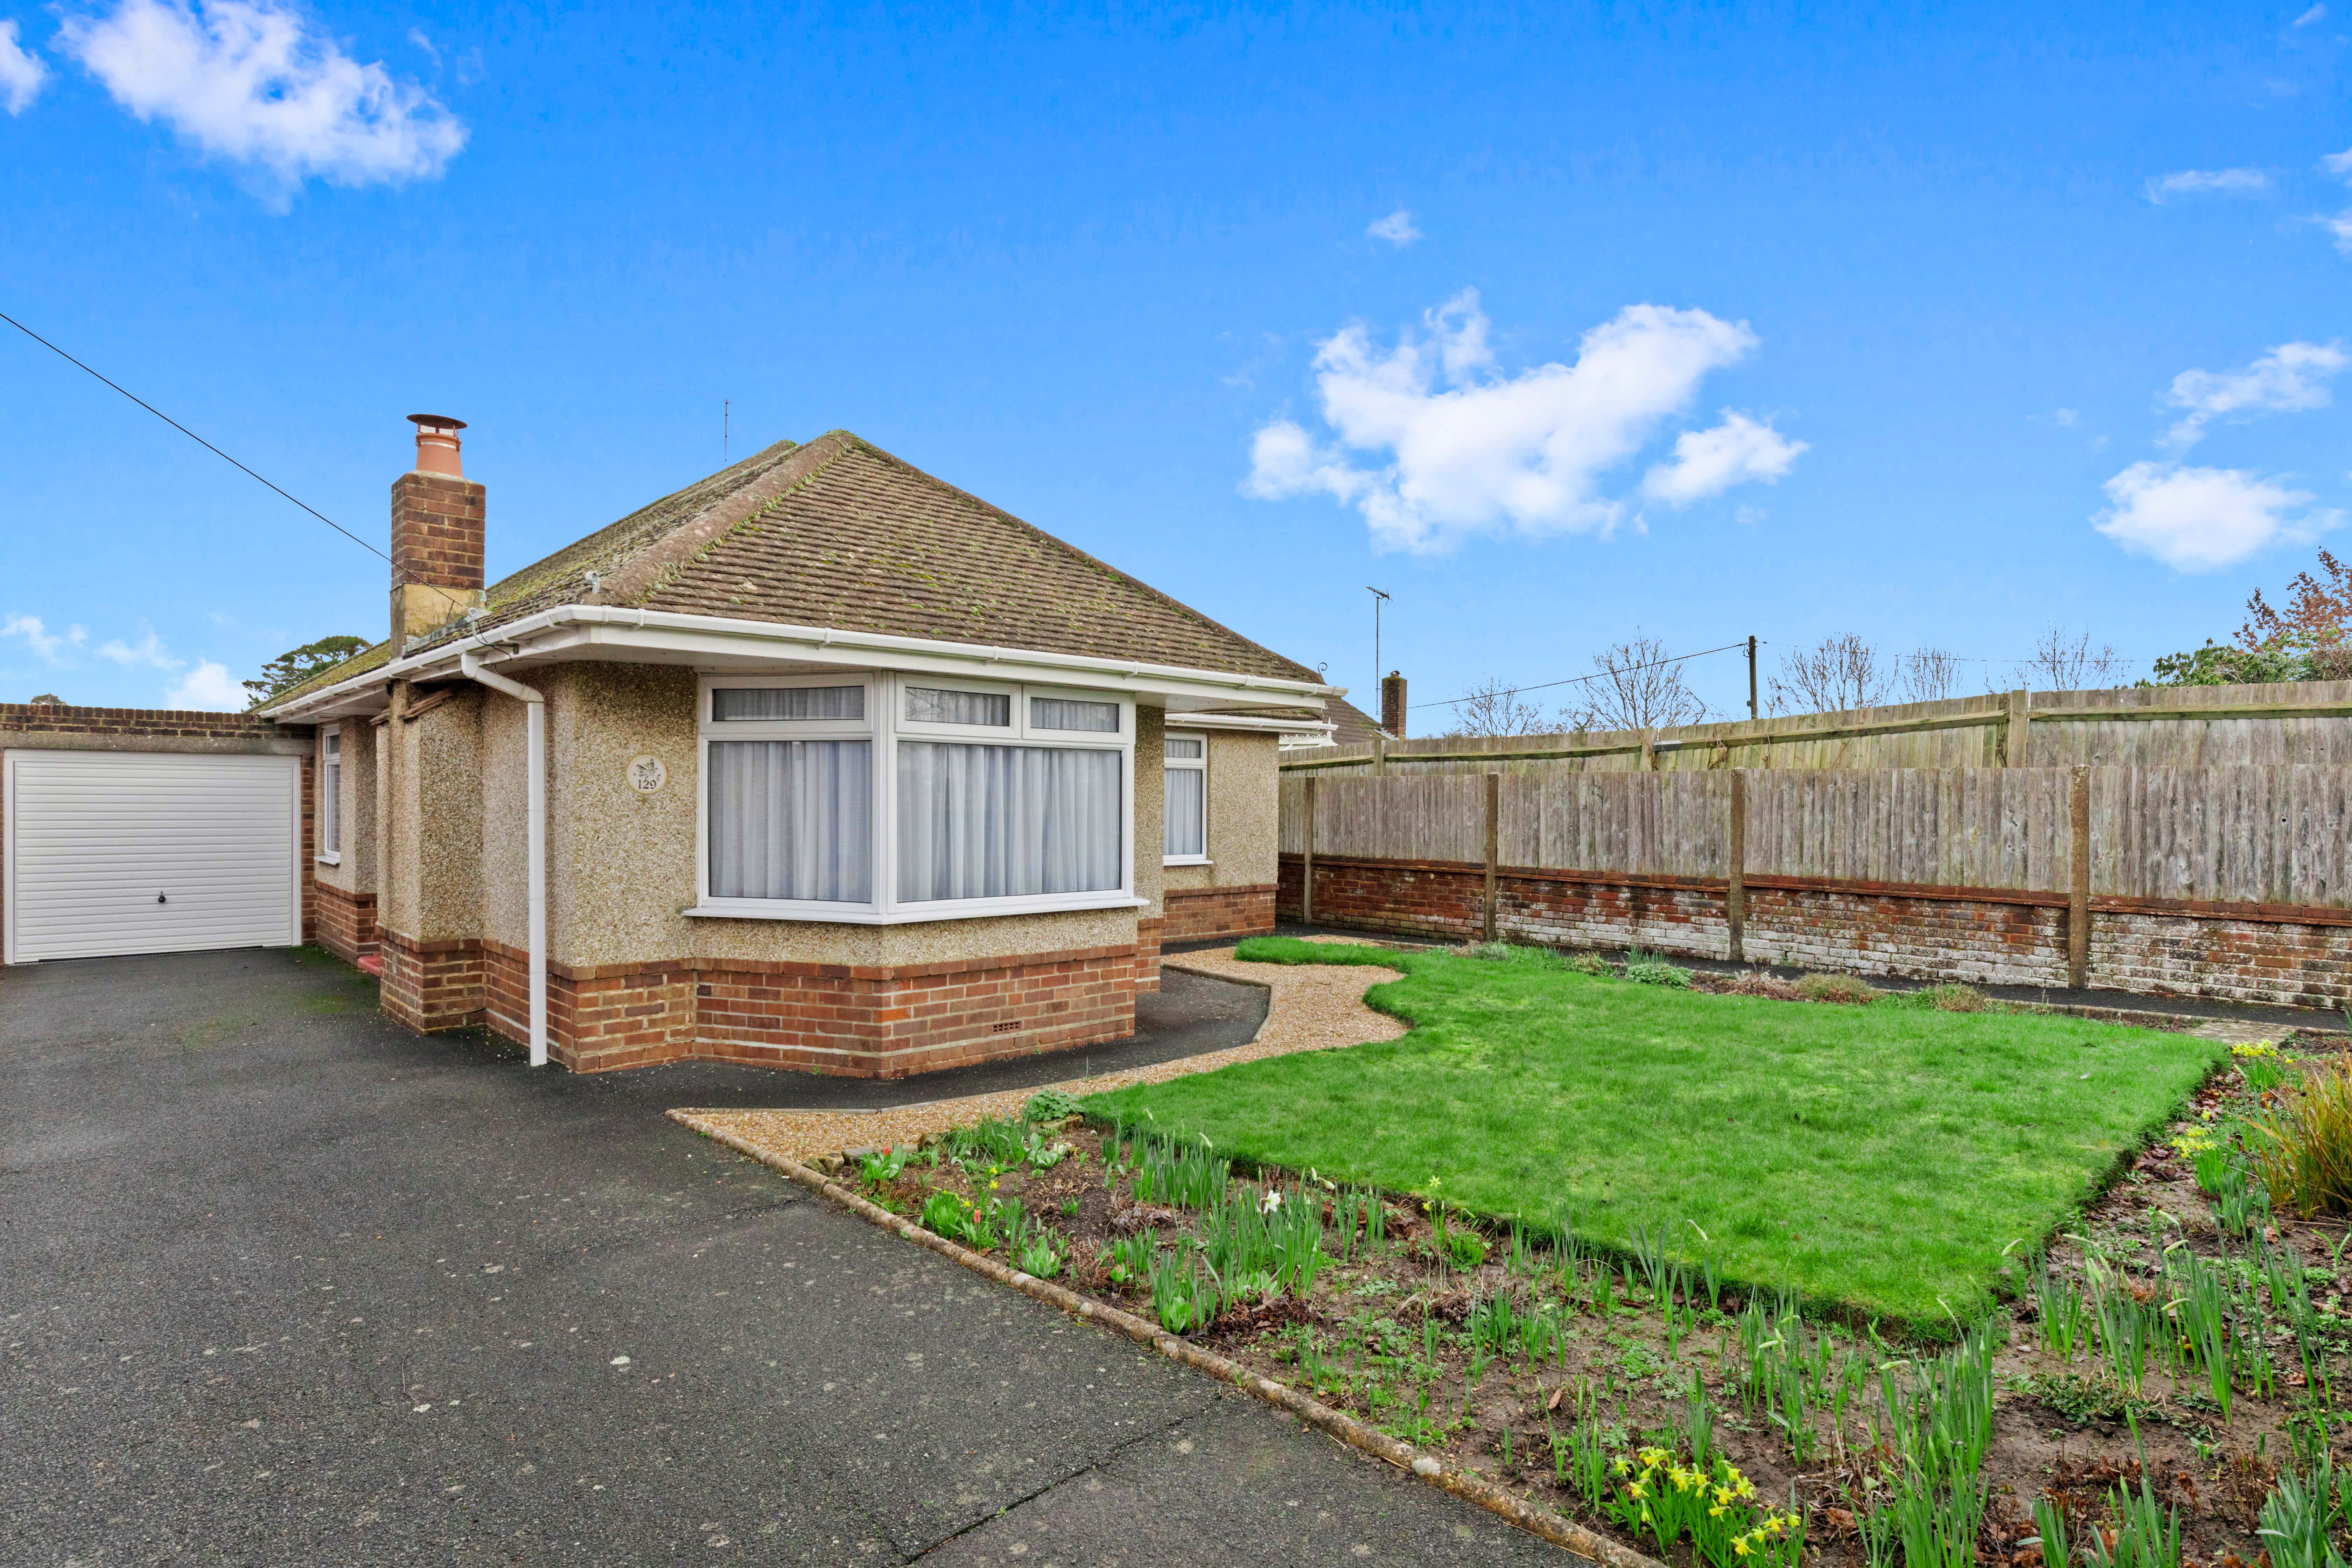 Grand Avenue, Hassocks, West Sussex, BN6 8DH